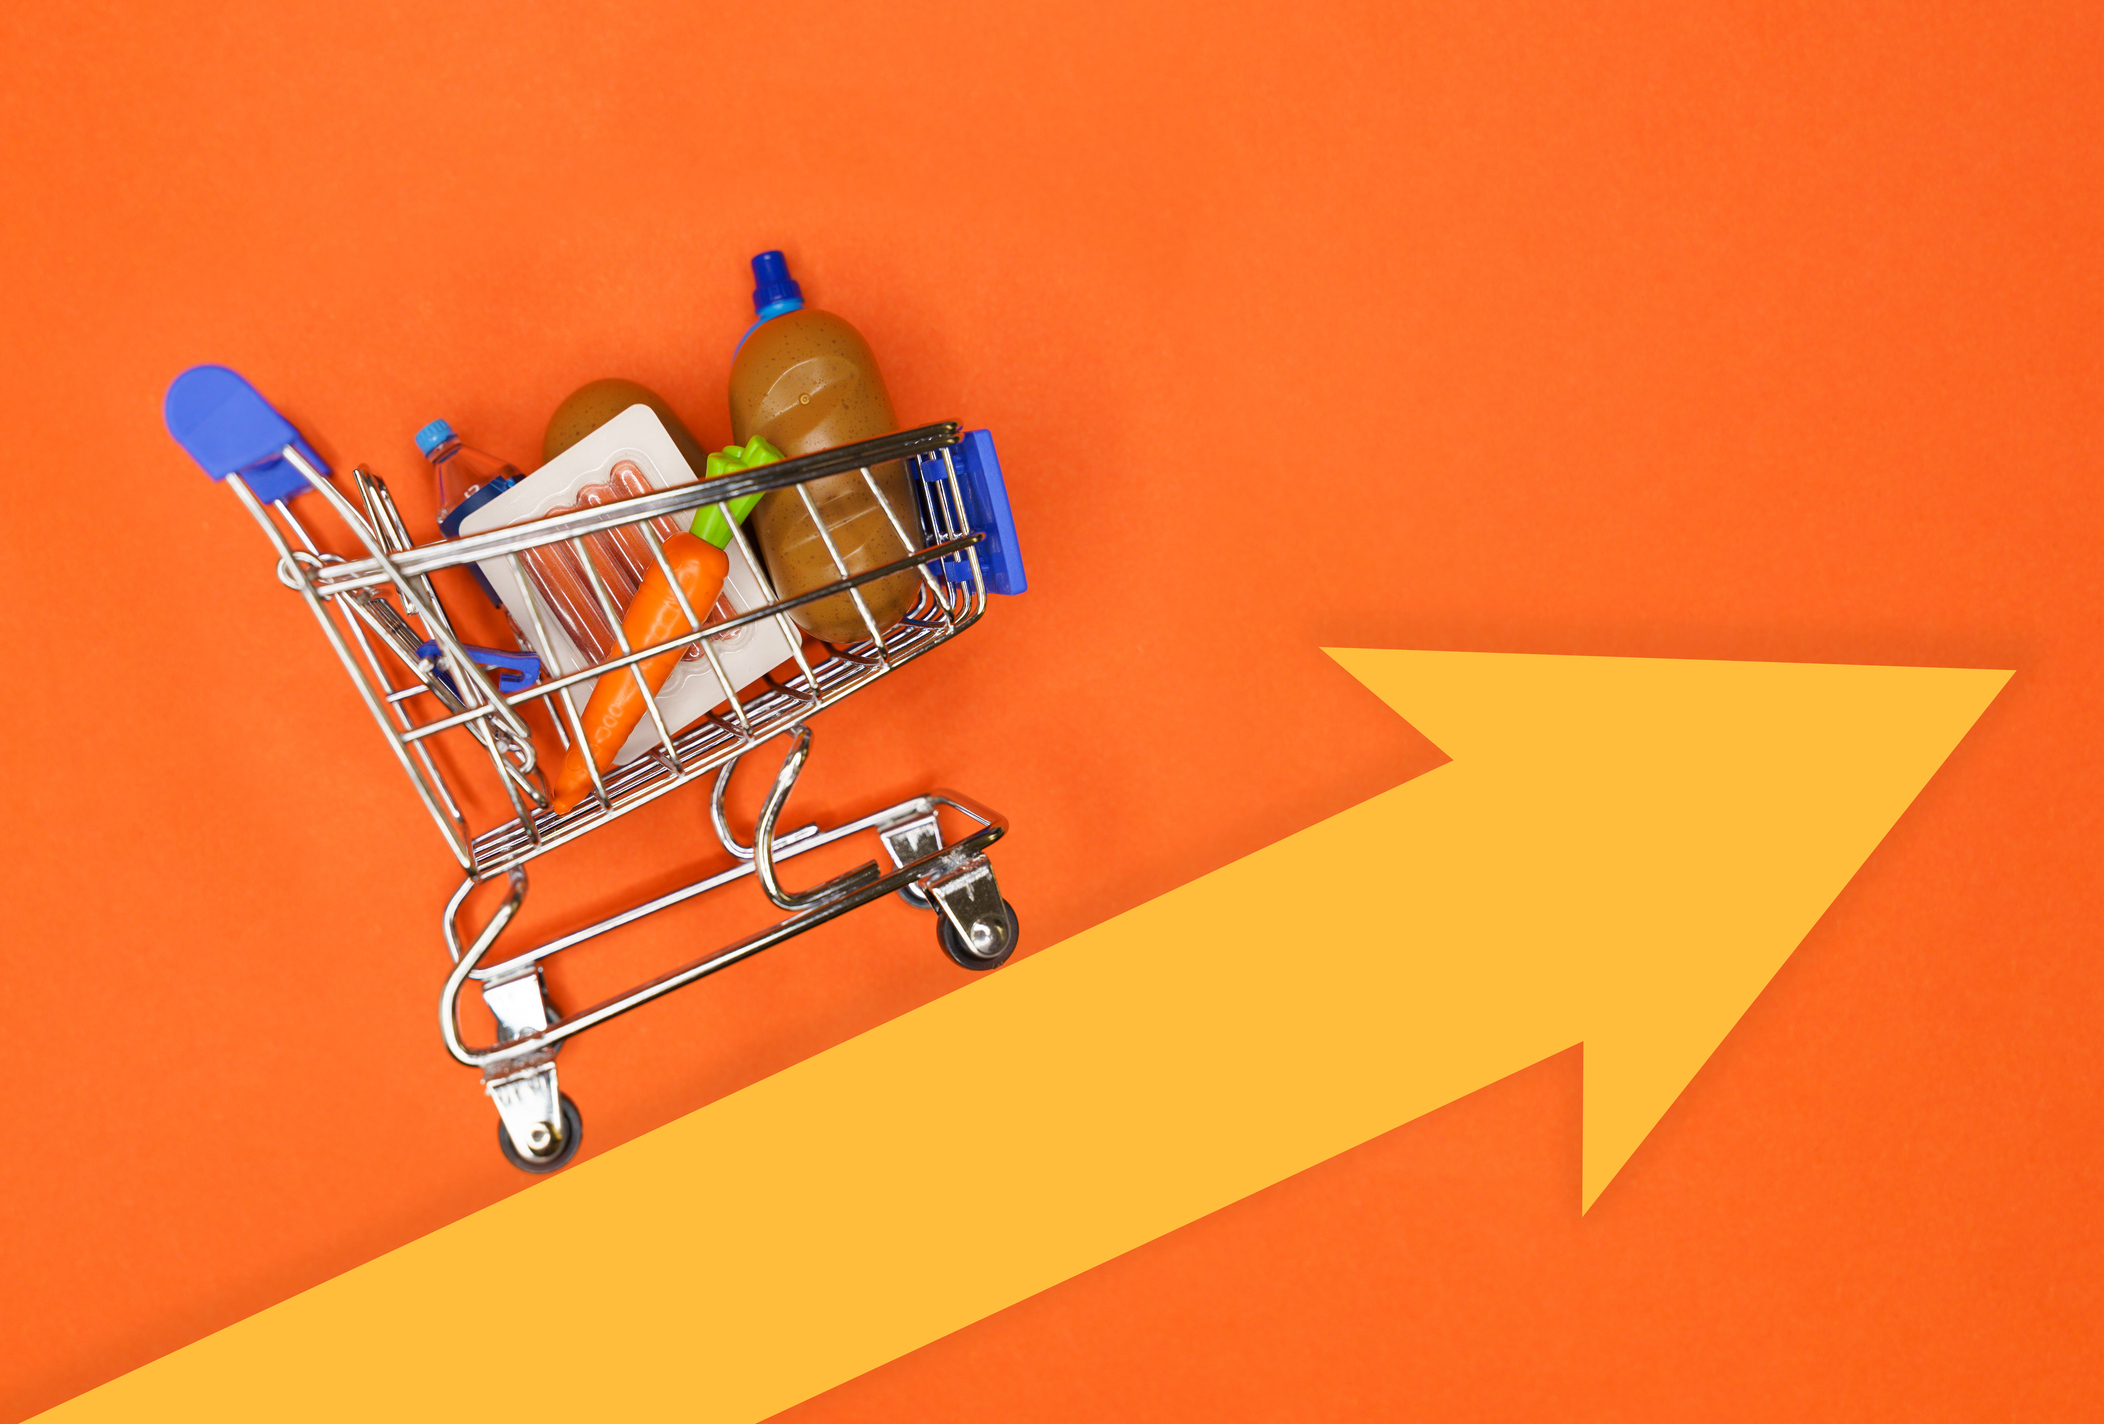 Mini shopping cart filled with groceries on orange background with a large yellow arrow pointing right